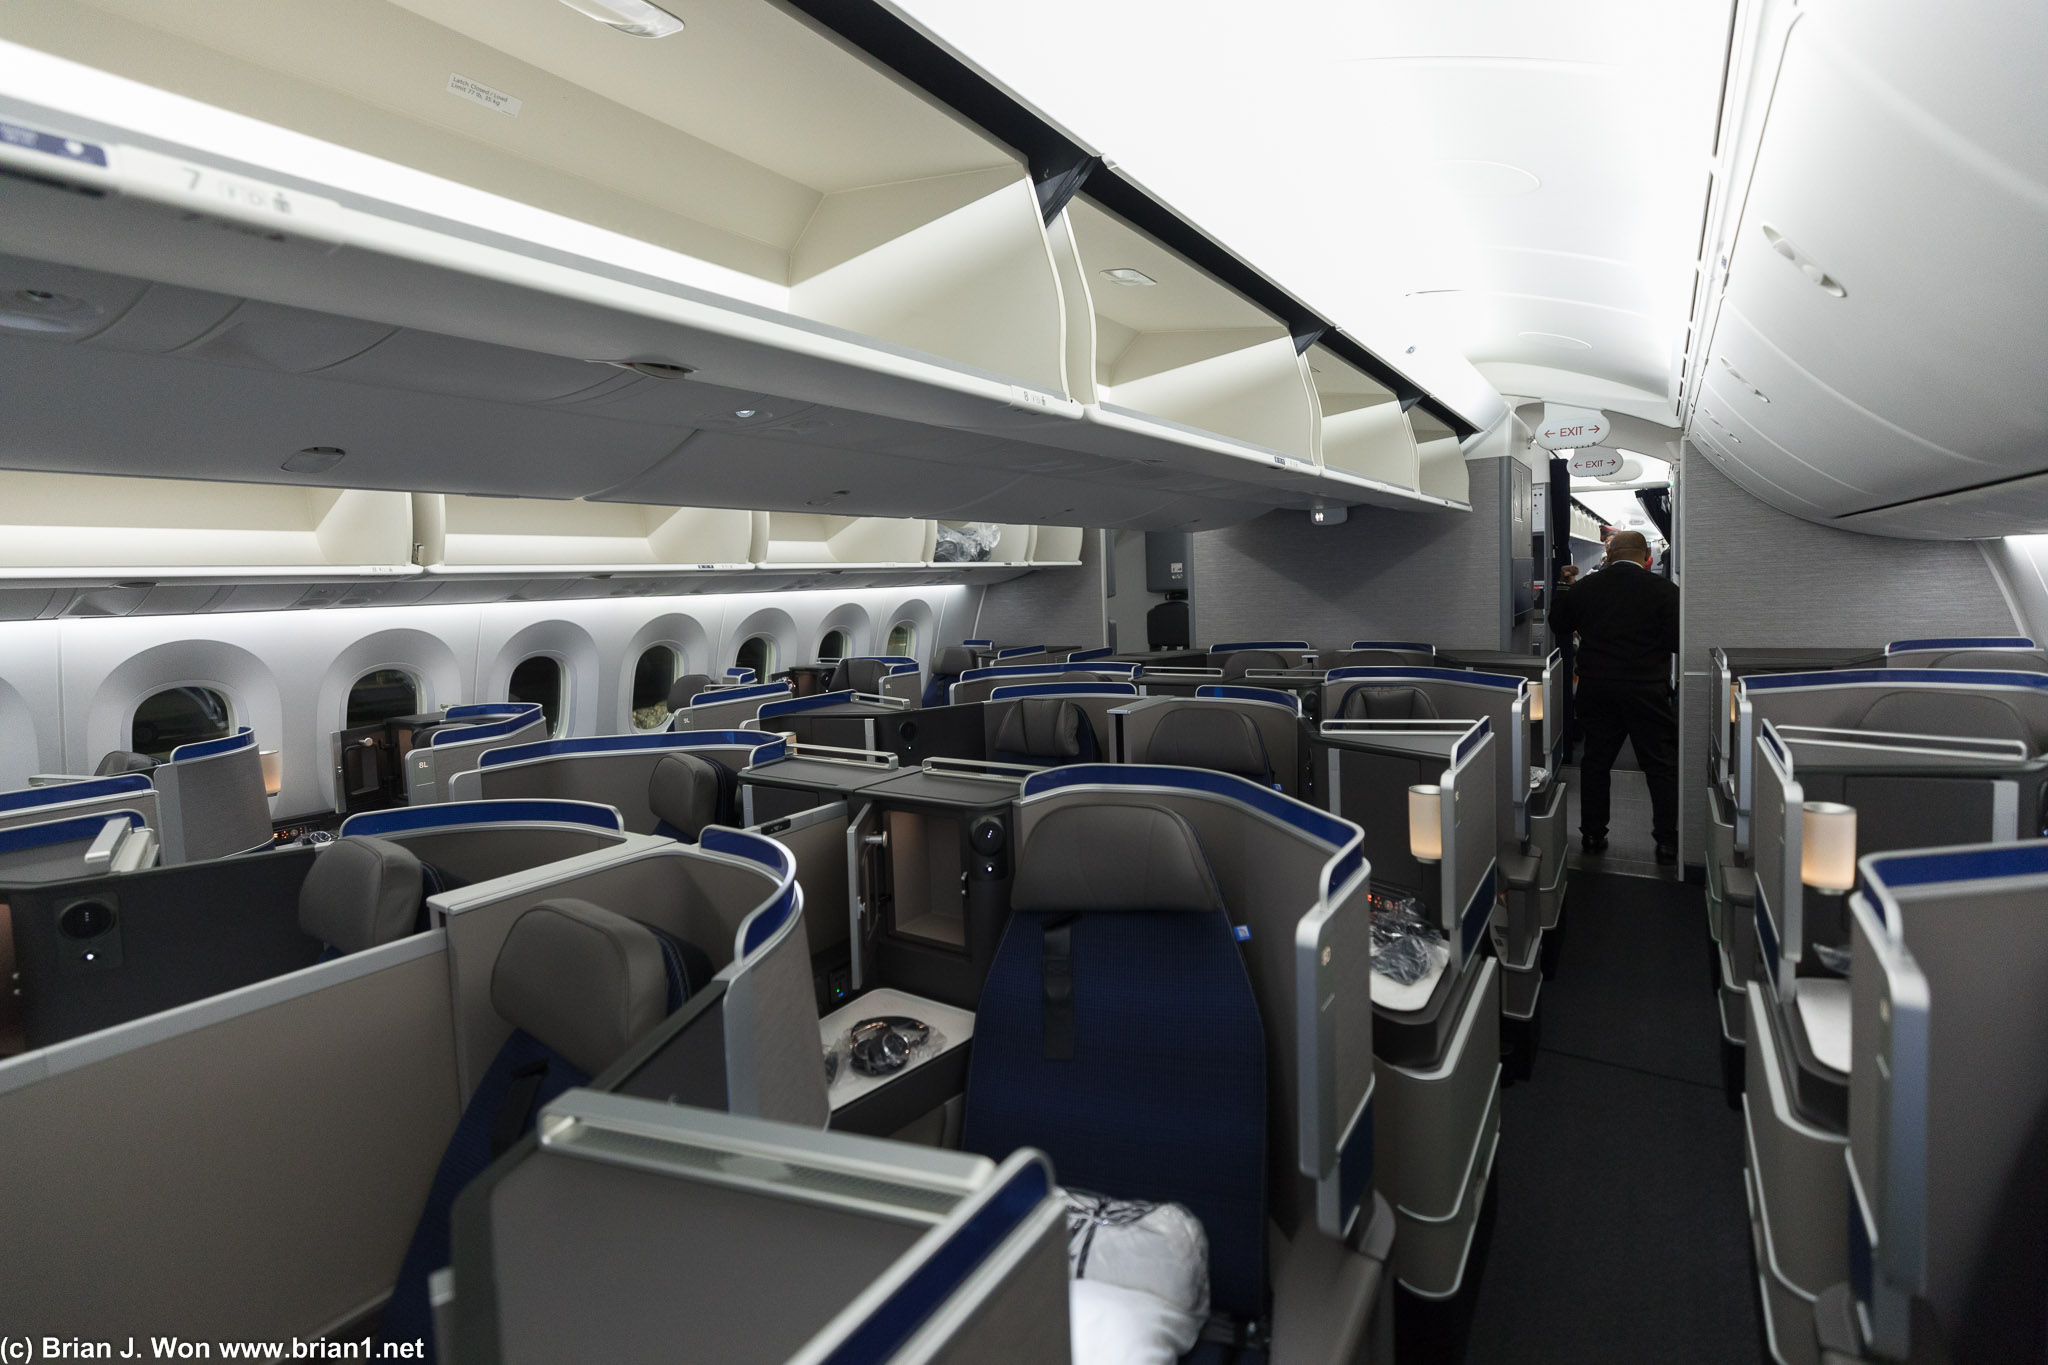 The cabin is more narrow on the 787, but you'd be hard-pressed to tell